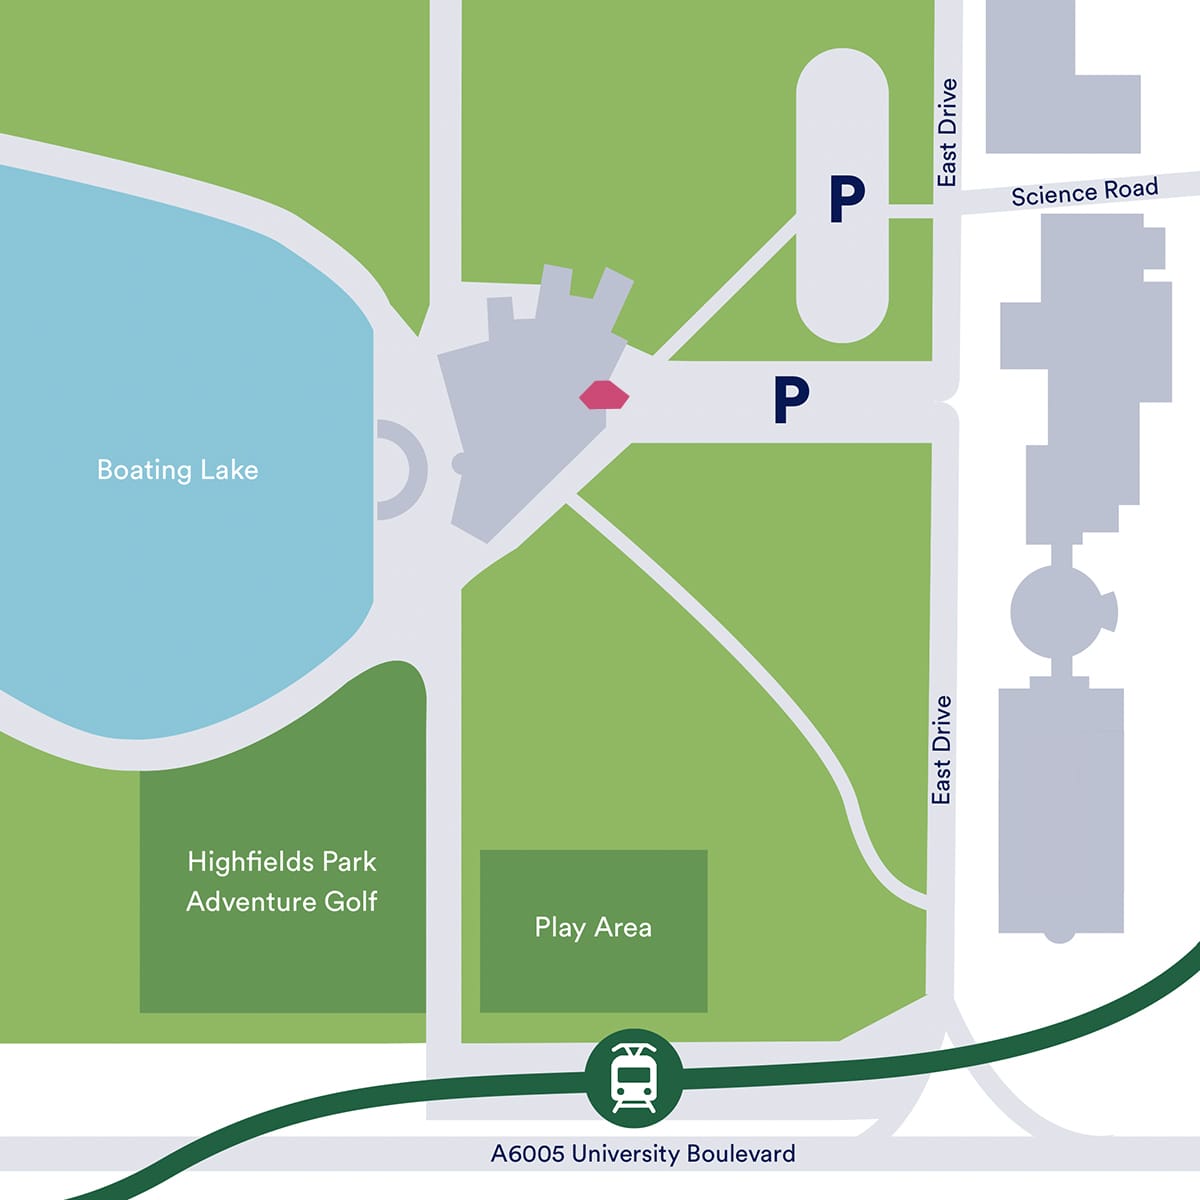 A map showing where Meeting Room One is located in relation to Lakeside Arts' buildings and the surrounding parkland.